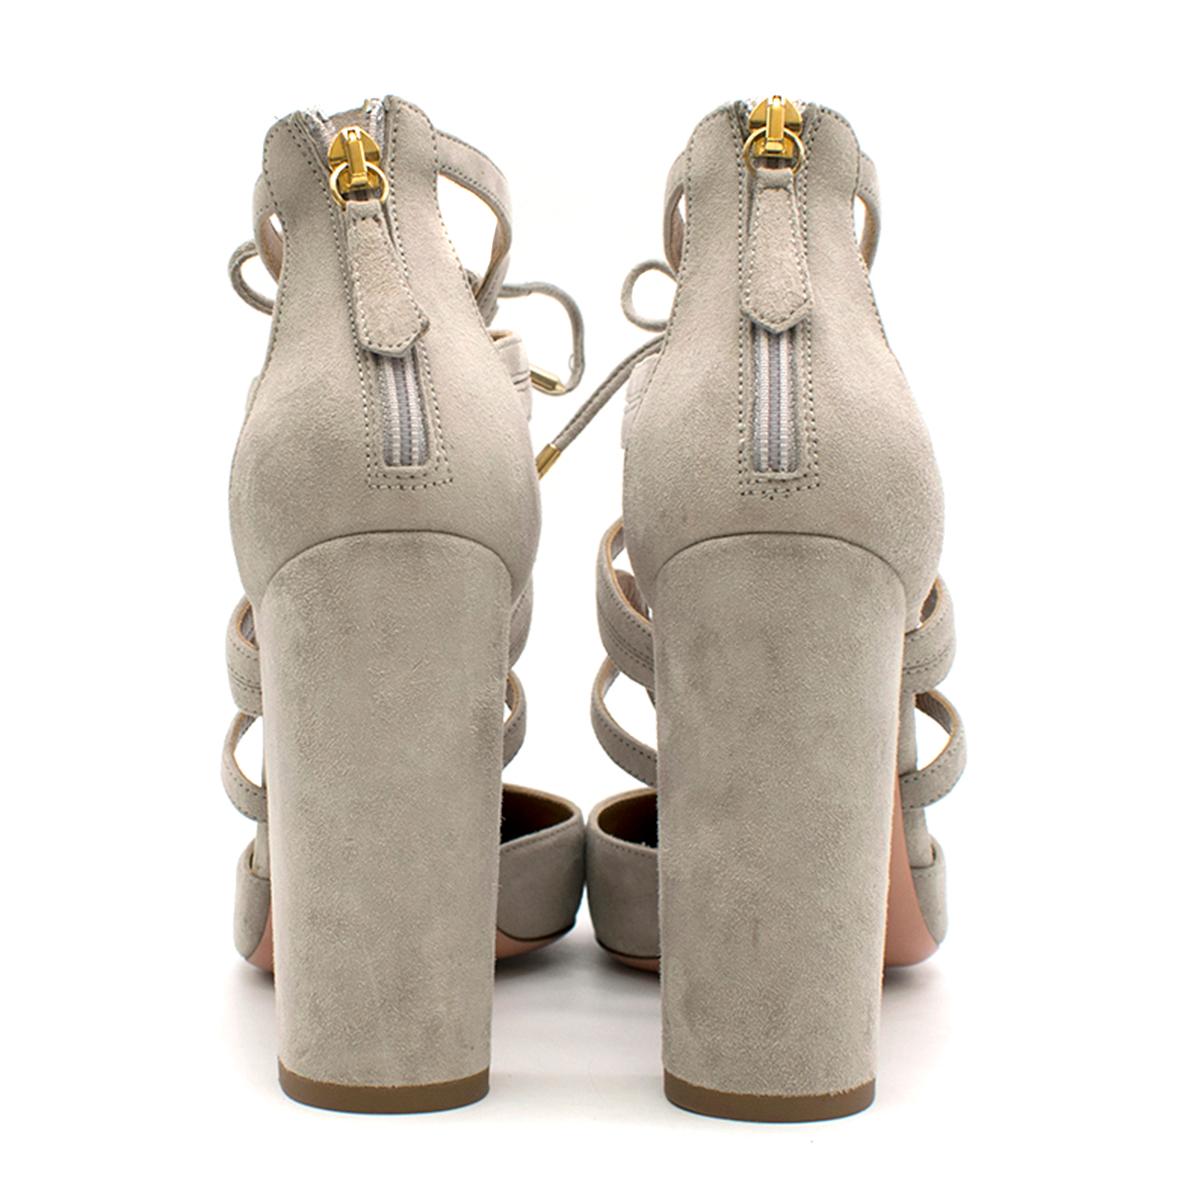 Aquazzura Light Grey Suede Tie-up Heel 

-Light grey, suede
-Round-toe
-Block heel style
-Zip up heel panel 
-Tie-up closure 
-Gold accents 
-Signature gold pineapple on sole

Please note, these items are pre-owned and may show some signs of